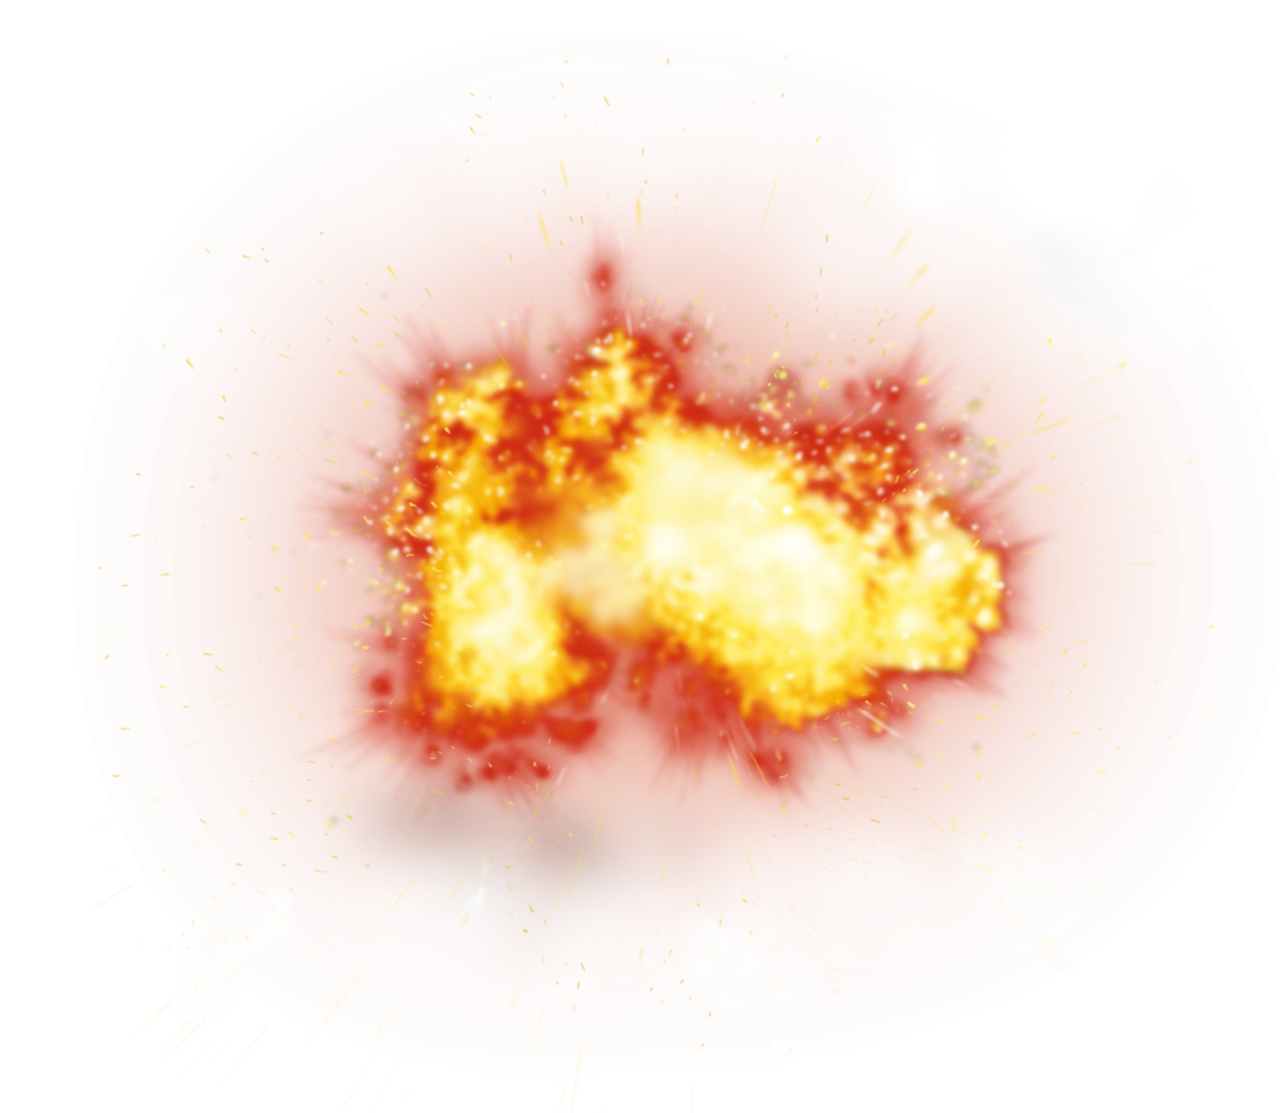 Big Giant Fire Explosion PNG Image - PurePNG | Free transparent CC0 PNG ...